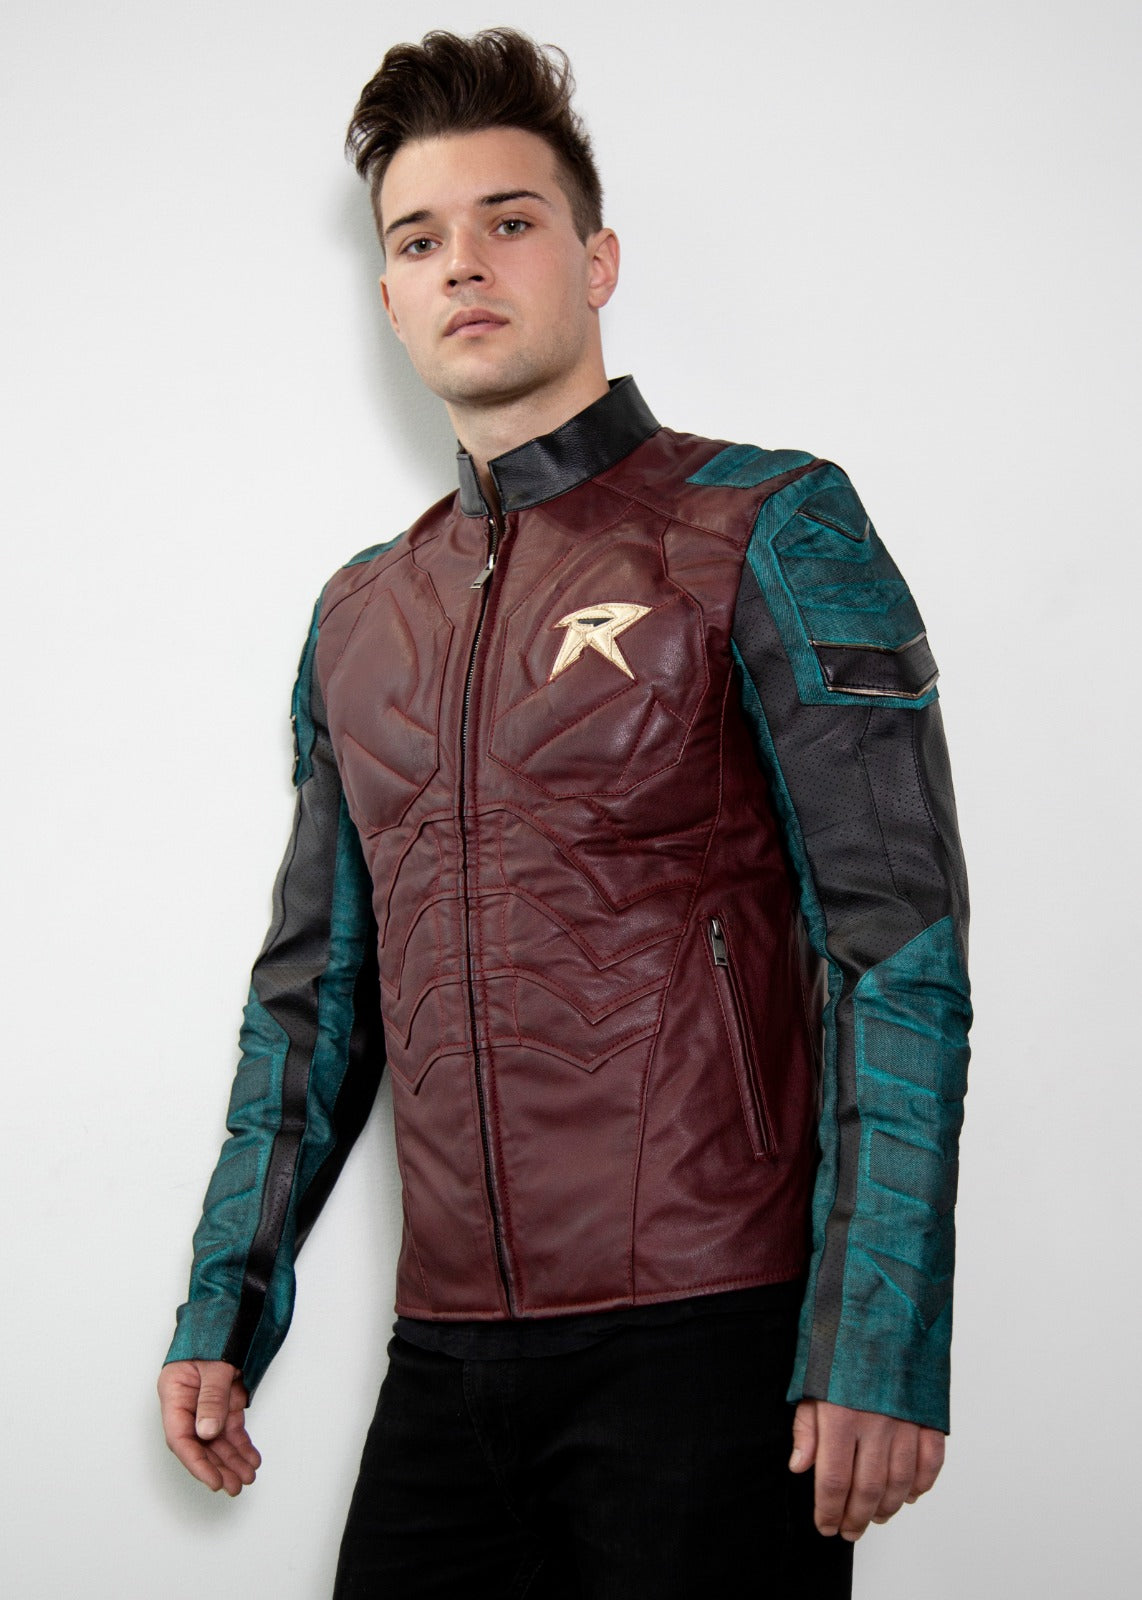 Mens robin  batman armored  red leather jacket cosplay